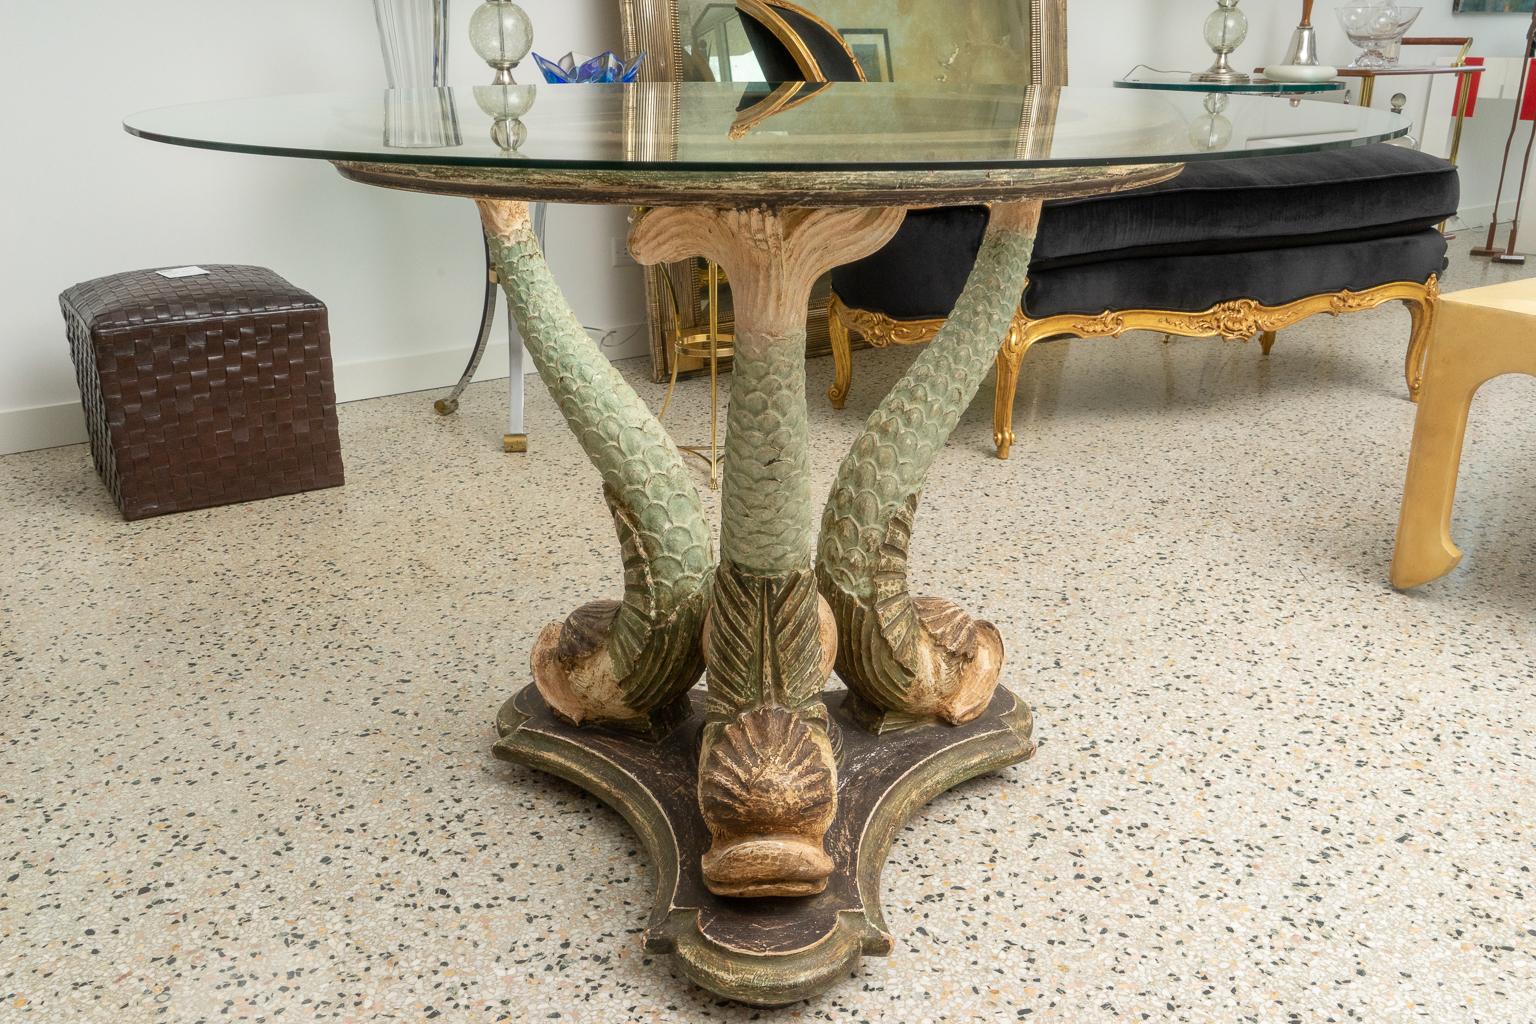 This stylish and chic centre table dates to the end of the 19th century and will make a statement as an entry centre table or perhaps as a dining table. The polychromed finish is subtle and elegant with its subdued color palate.

Note: Dimensions